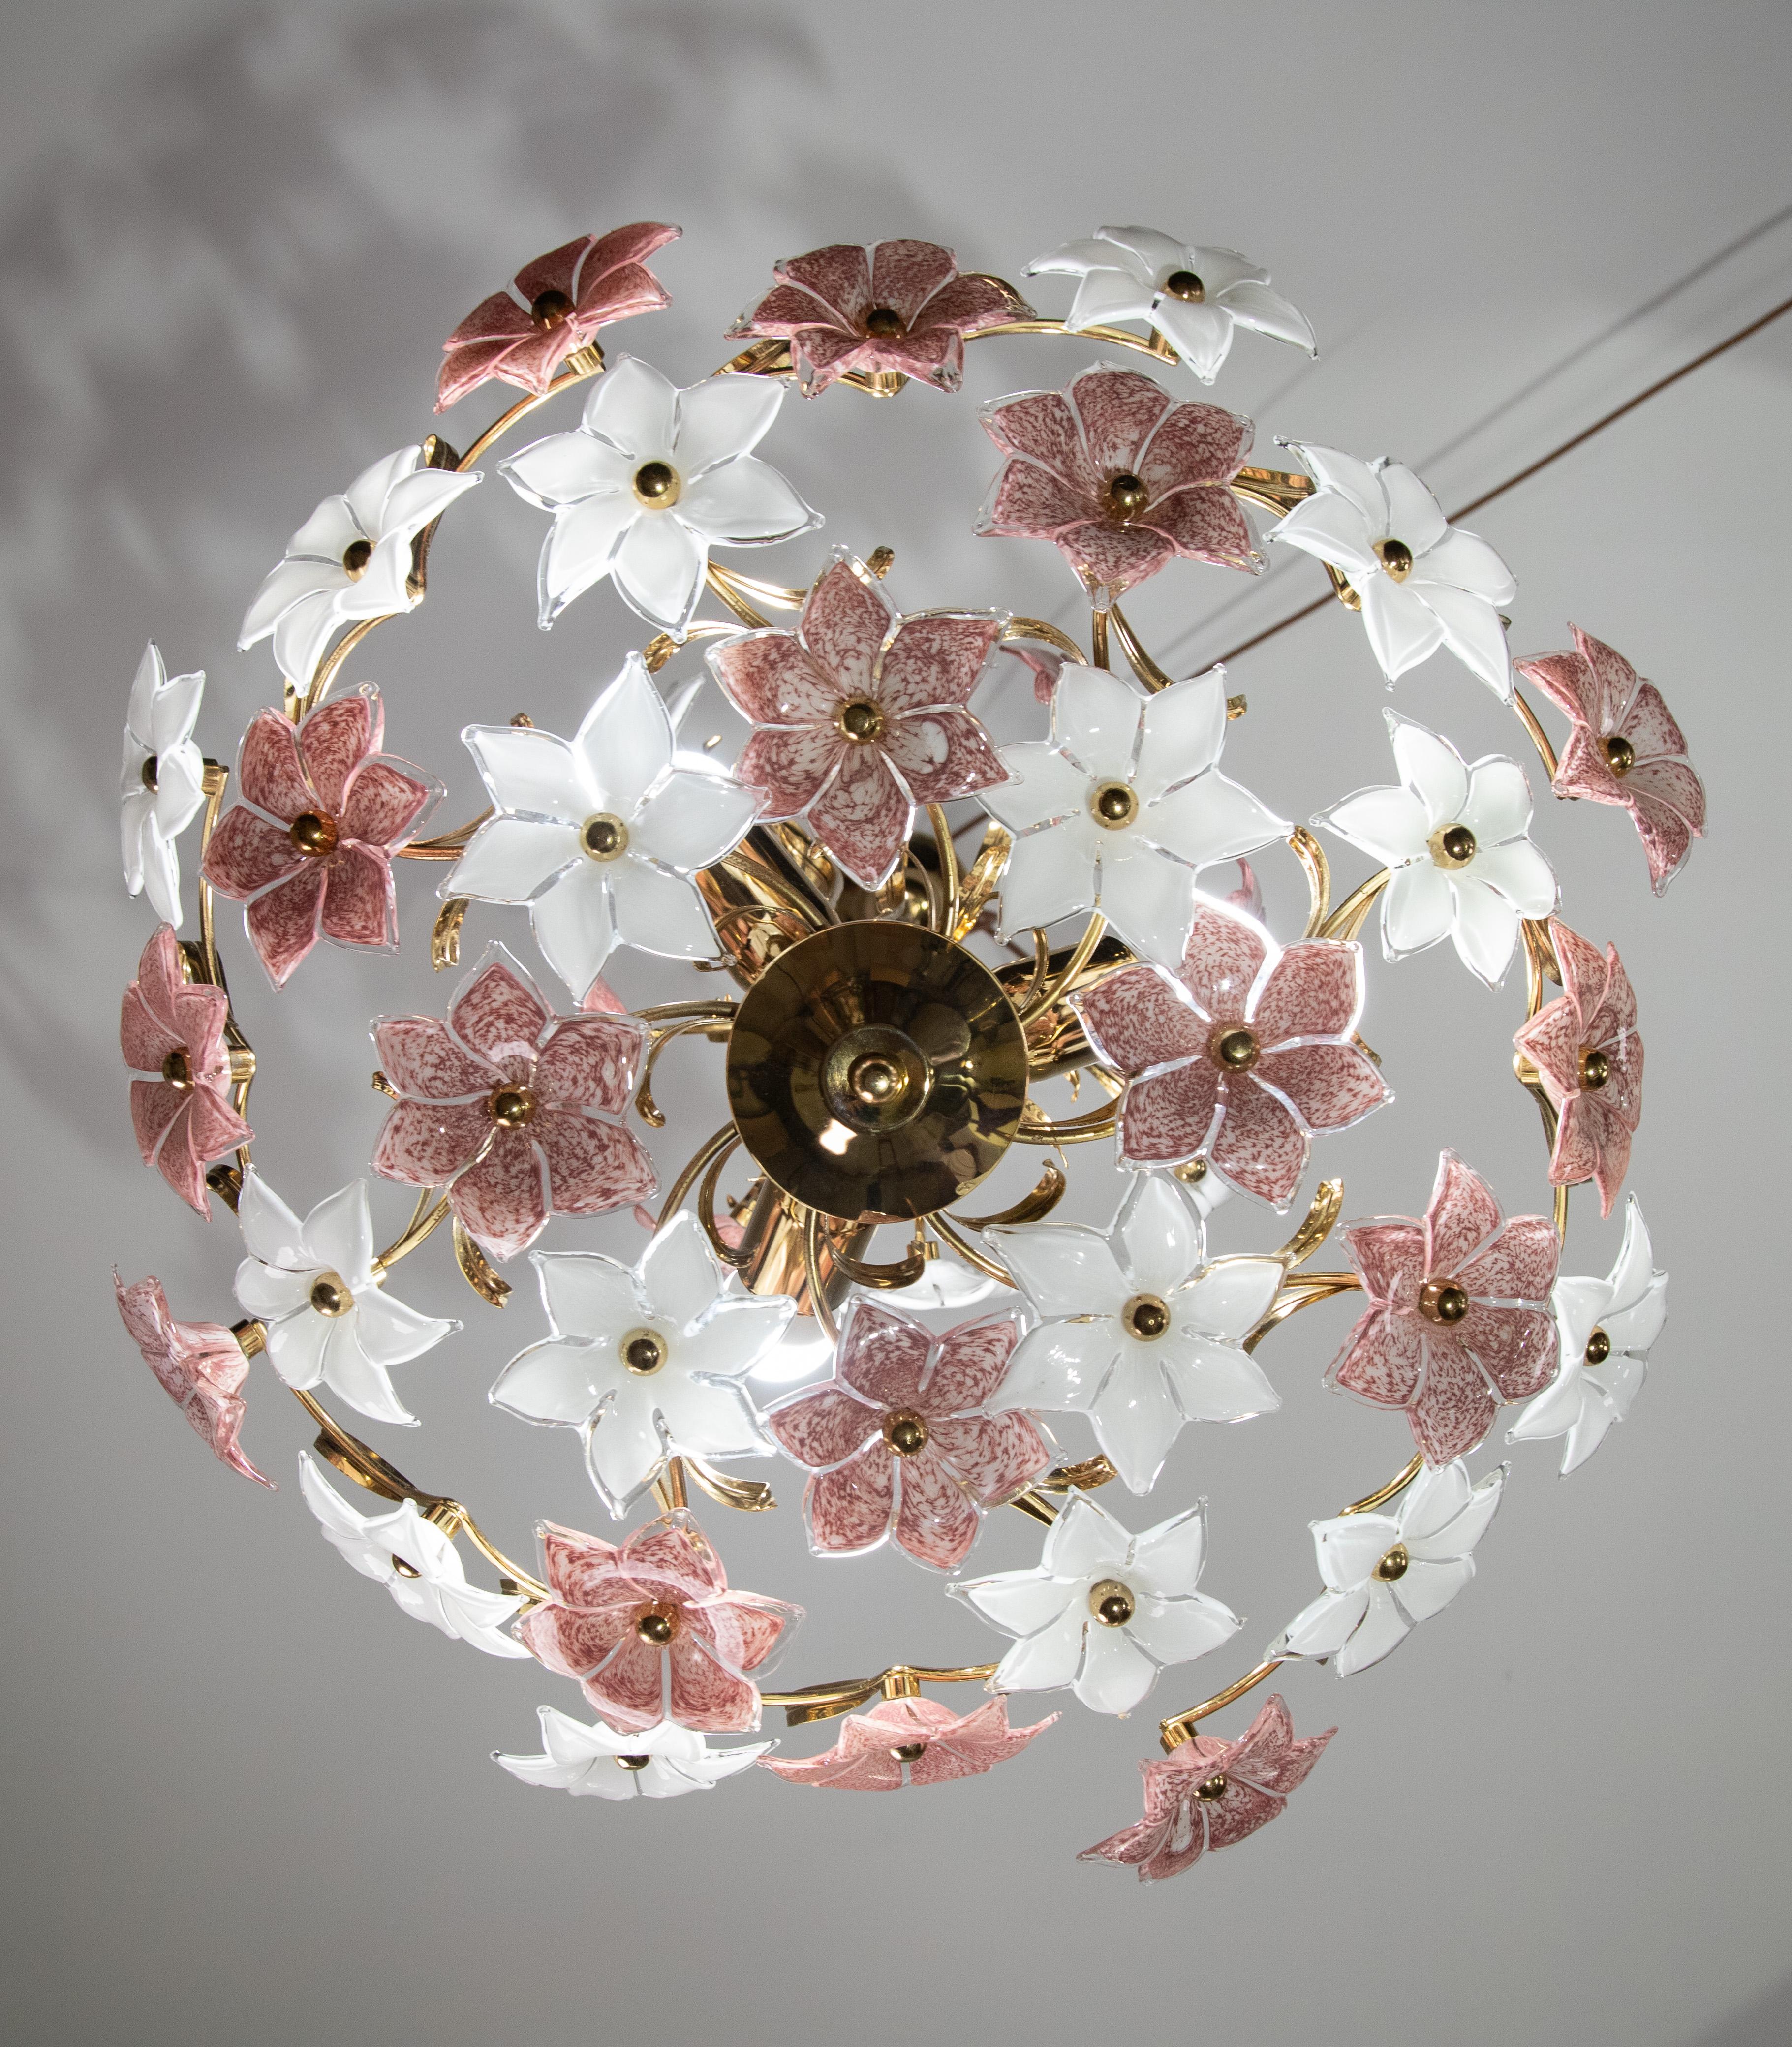 Vintage Murano glass chandelier full of white and pink flowers.
The chandelier has 3 light points with E27 connection.
The structure is in gold bath.
The height of the chandelier is 130 cm with chain, 65 cm without chain, the diameter is 68, on